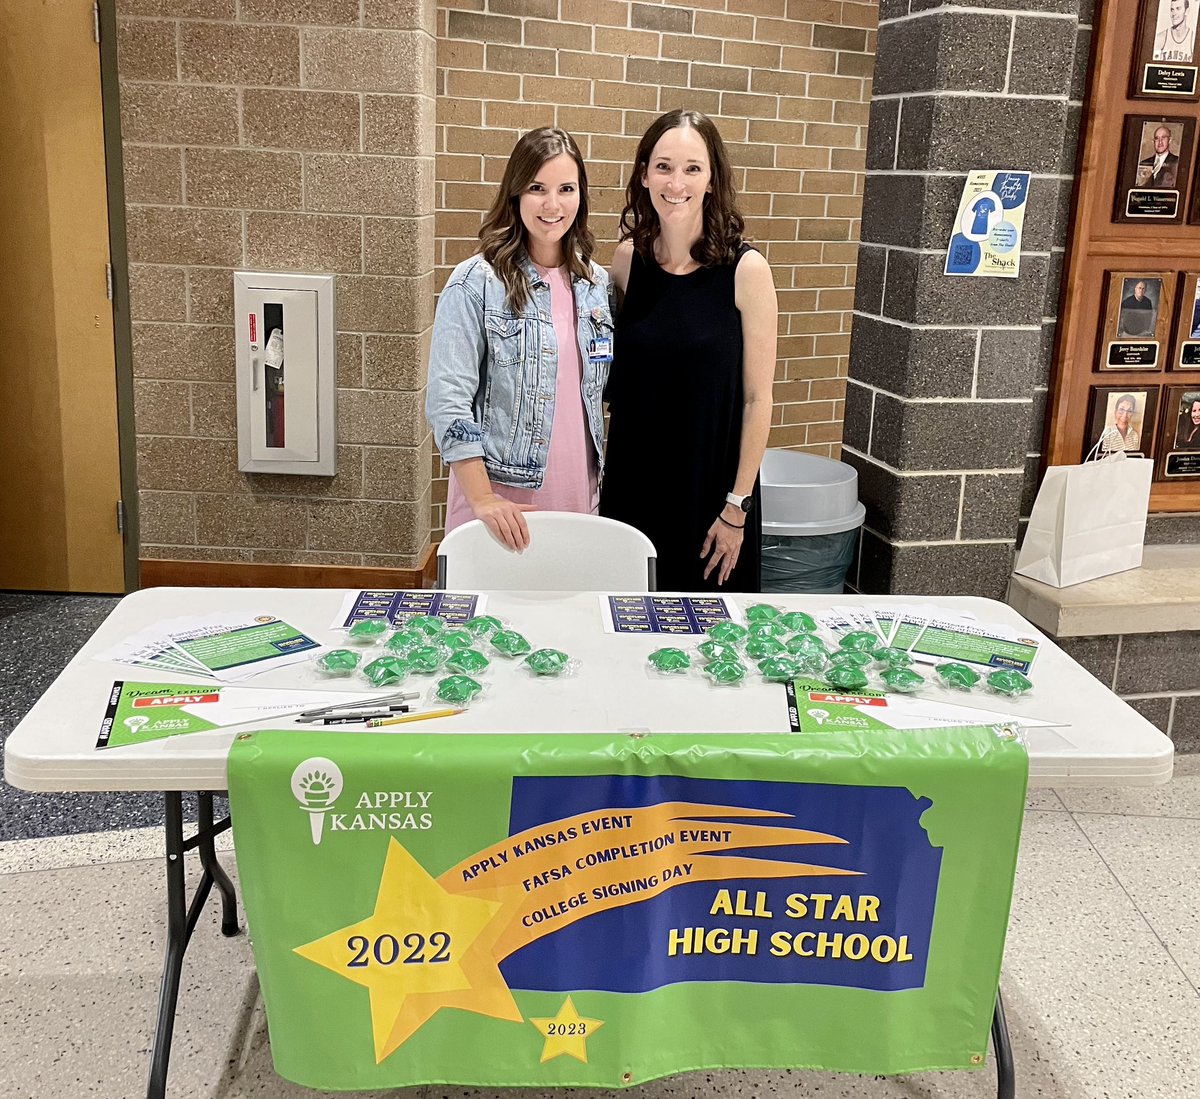 A successful WRHS College Night hosted by @wrhsgo! We had admissions representatives, a presentation on college application process and a KU rep. talked about FAFSA. We also had our #applyks table to encourage students to apply to college or other postsecondary goals. @ApplyKS